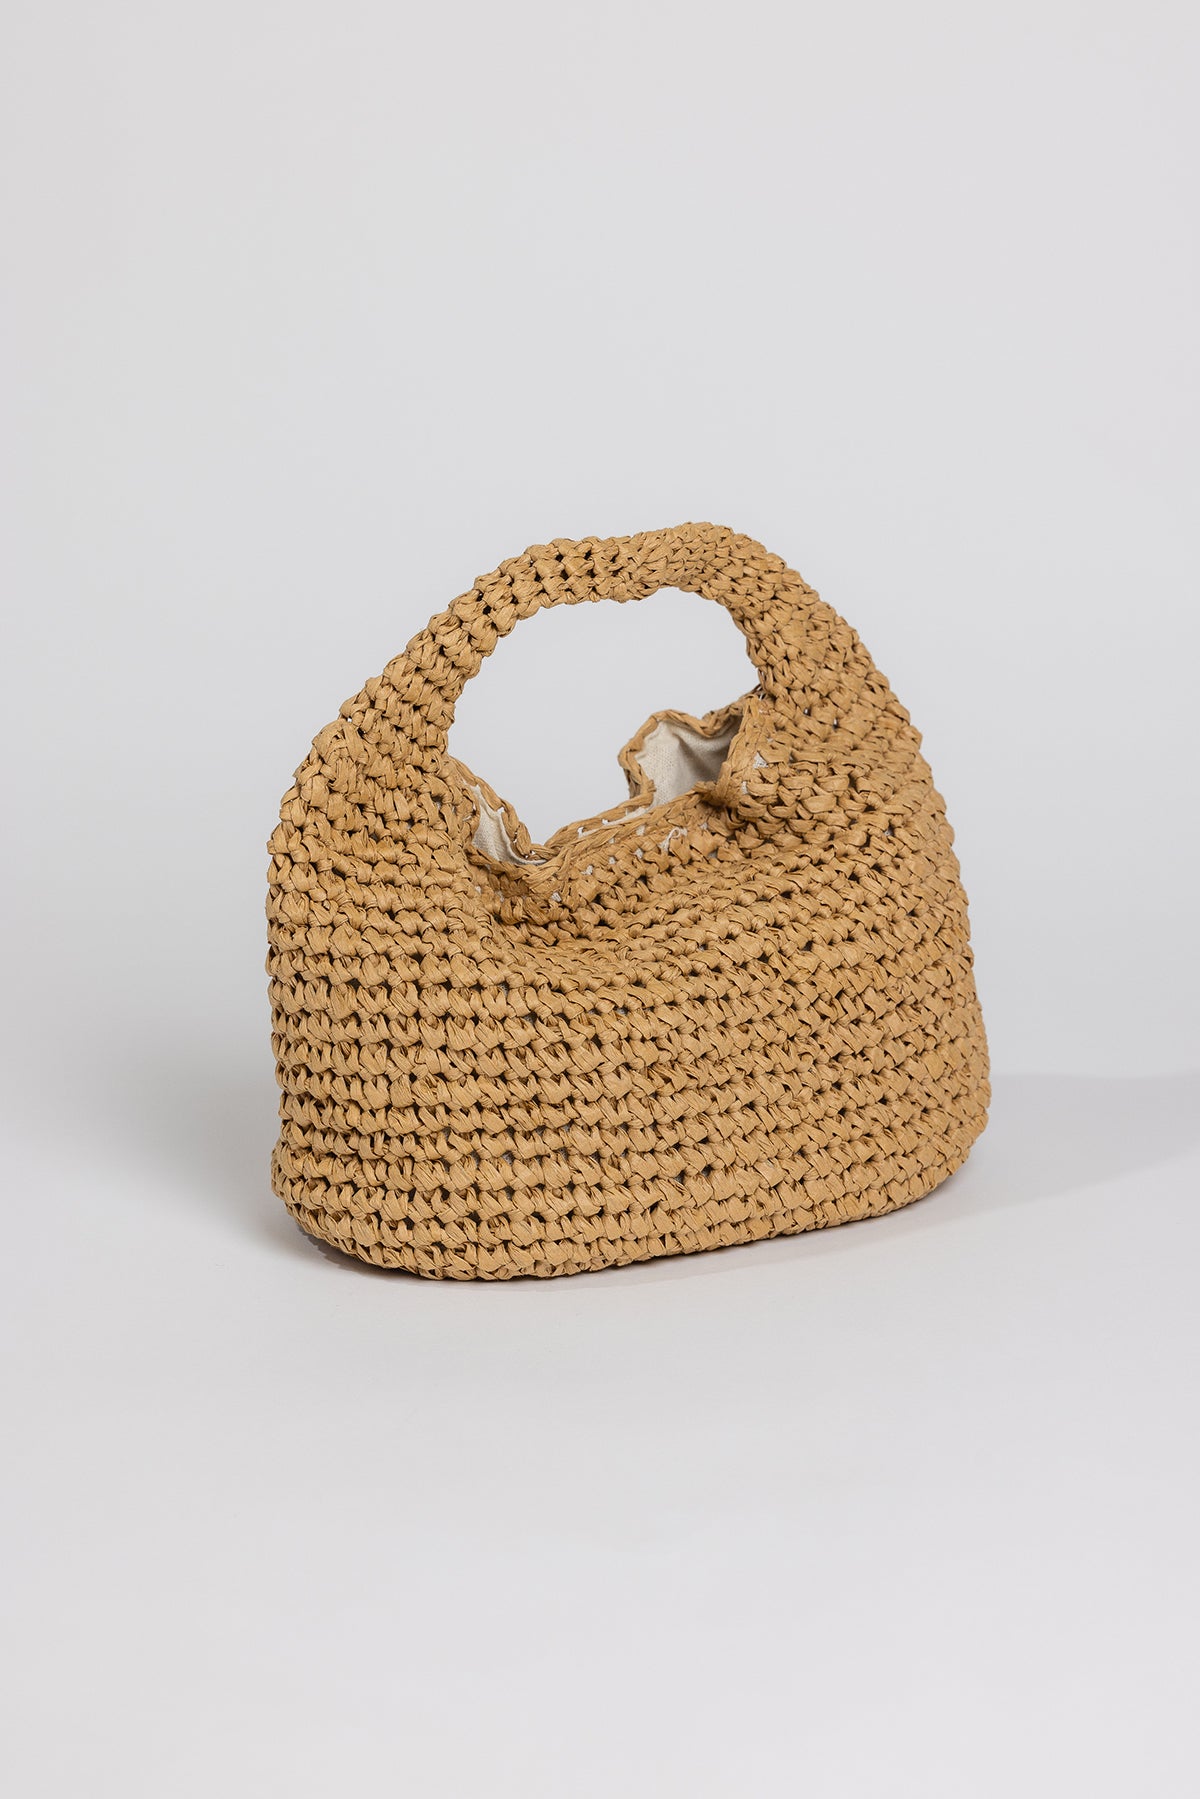   Woven paper straw slouch bag with a single handle, featuring a natural beige color and a soft inner lining, set against a light gray background by Velvet by Graham & Spencer. 